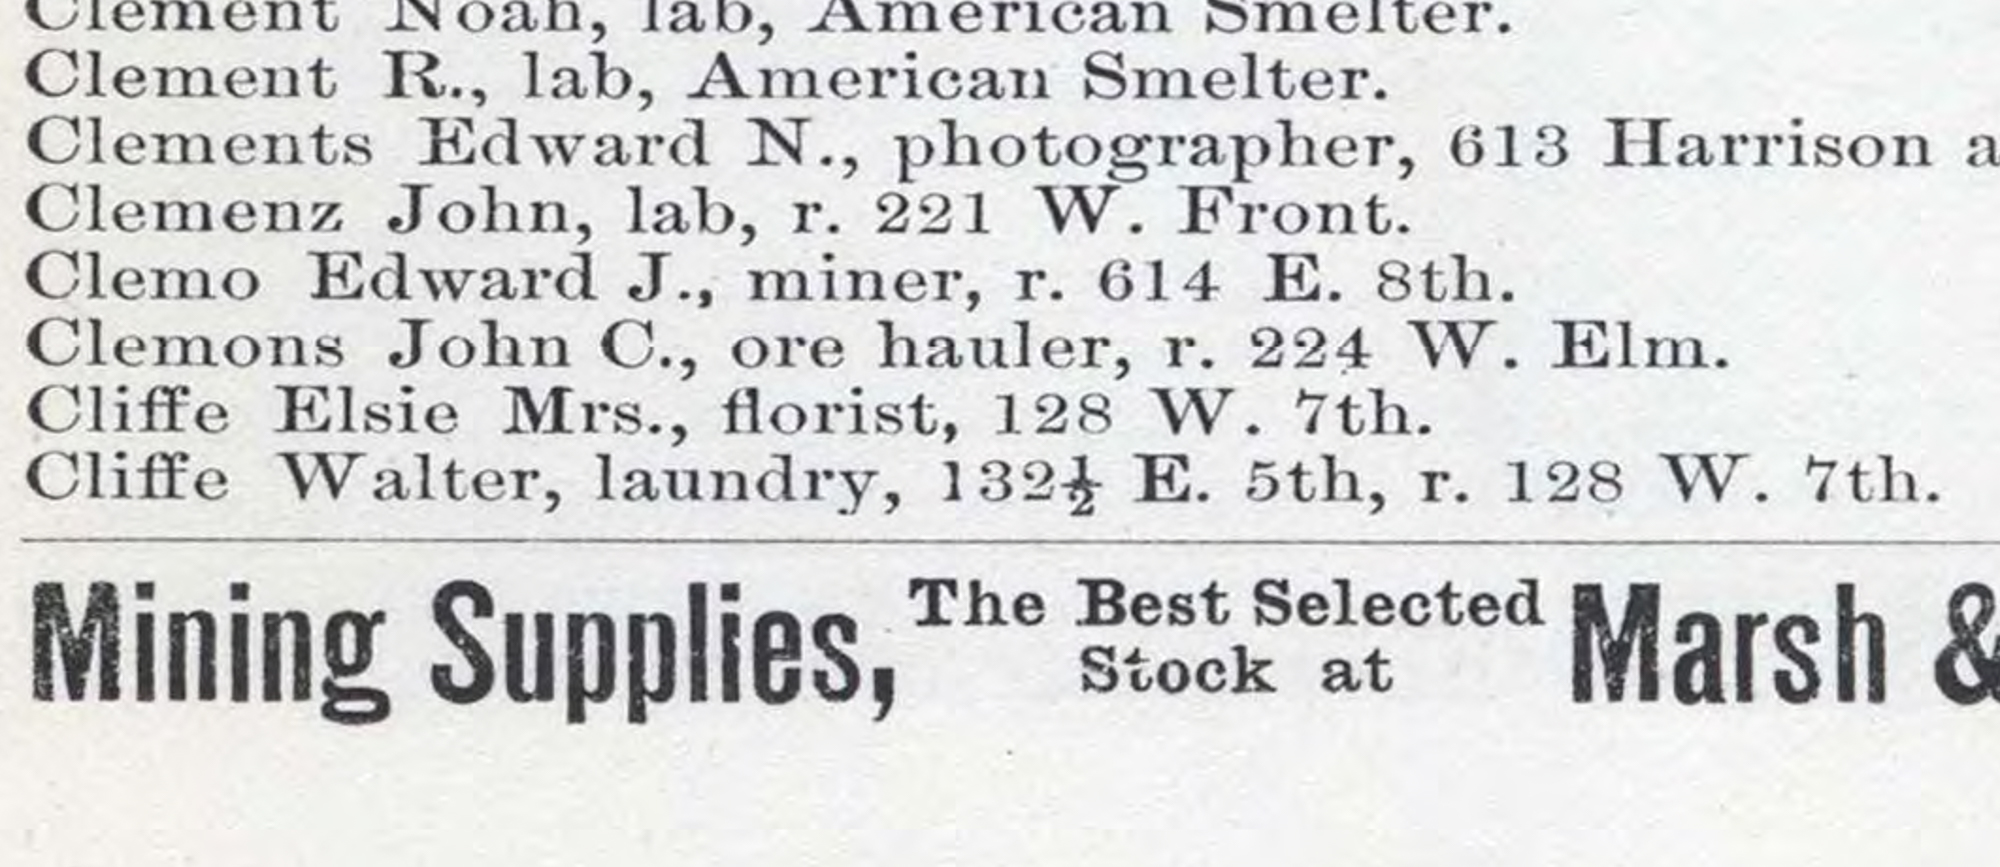 Dauth Family Archive - 1886 - Leadville Directory - Entry for Walter and Elisabeth Cliffe